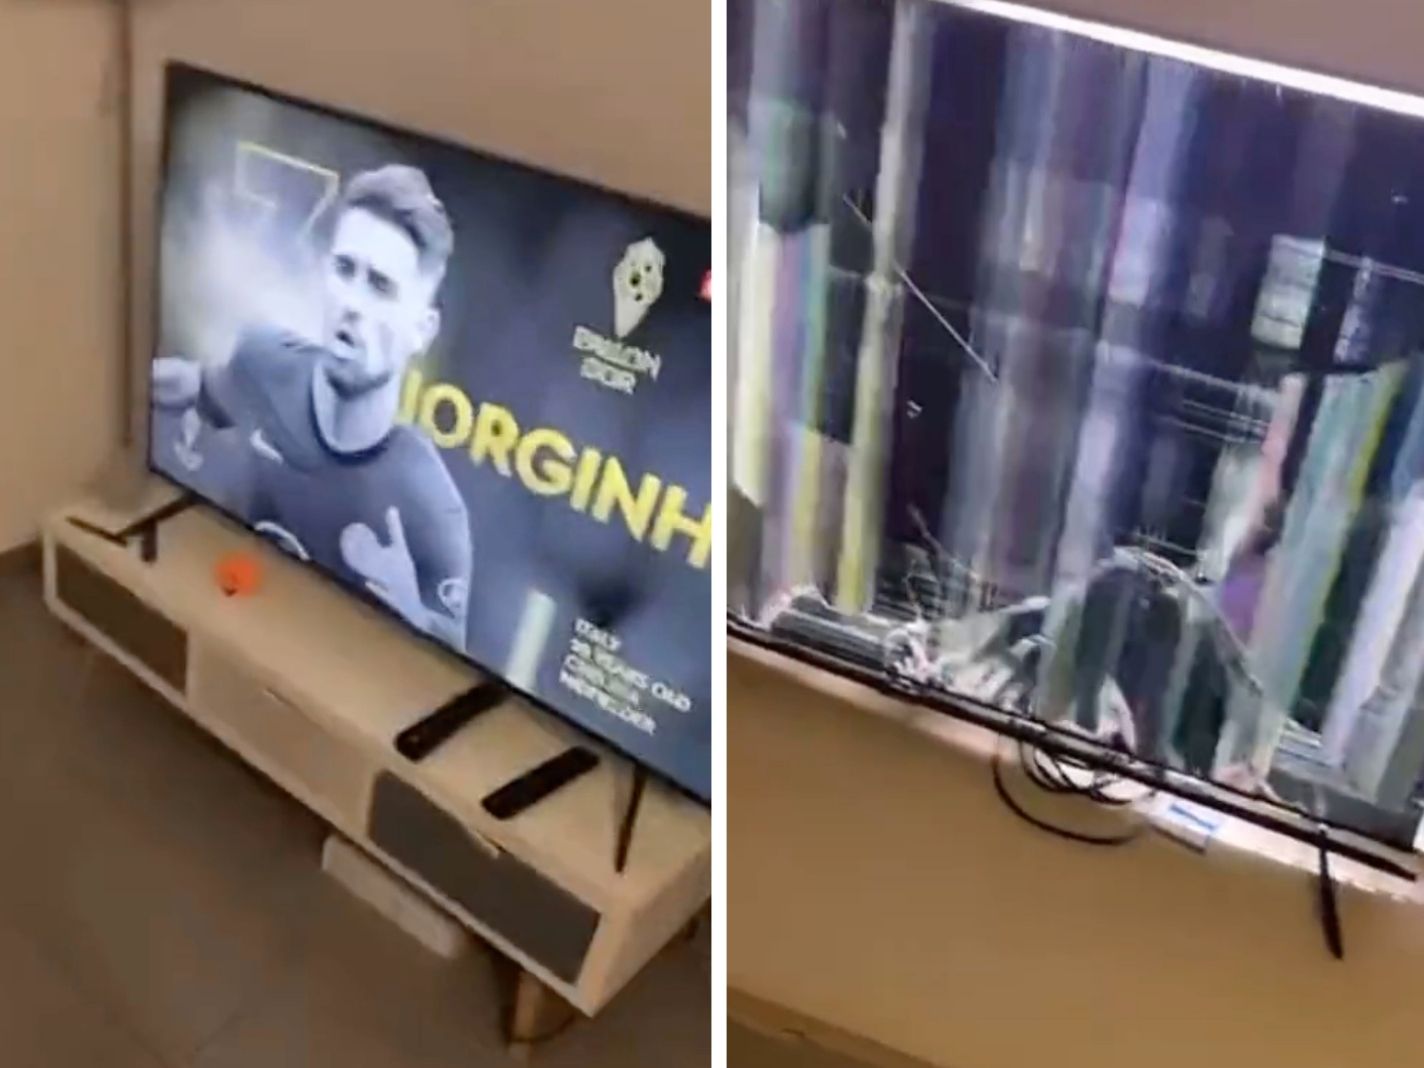 French football fan smashes TV in fit of rage after Karim Benzema loses out to Jorginho in Ballon d’Or ranking